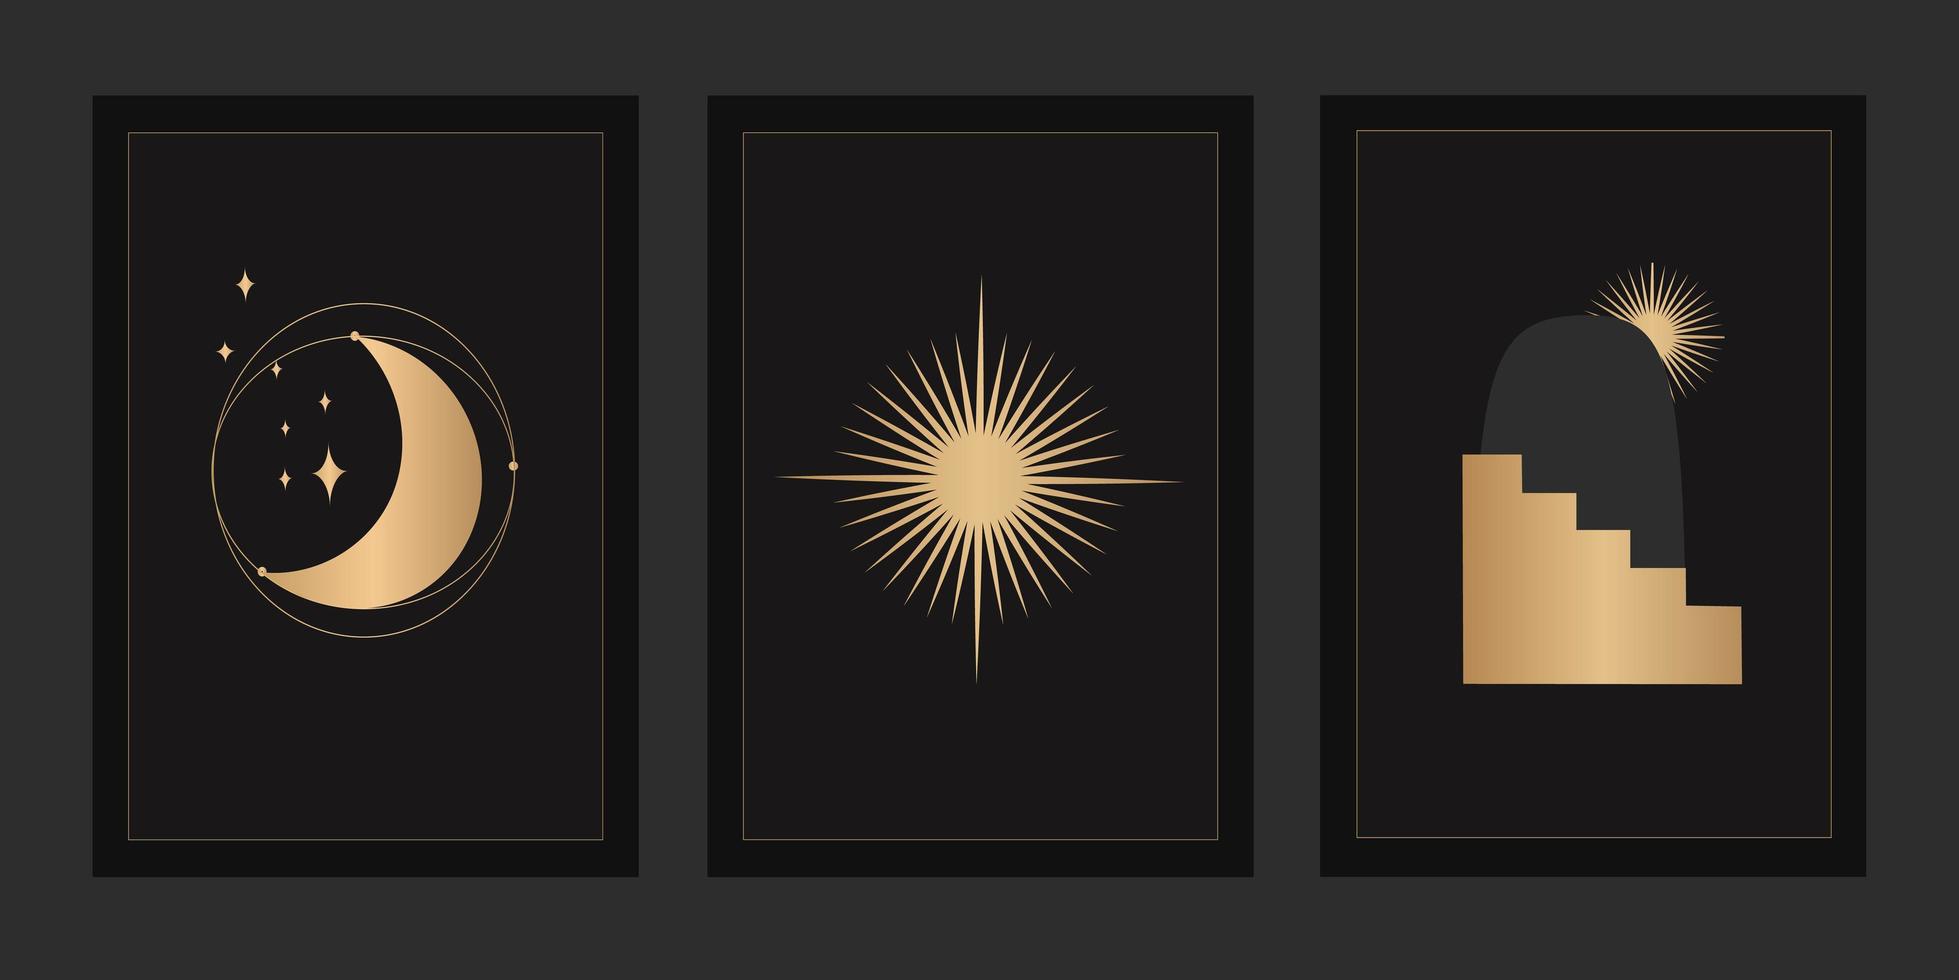 set of mystical templates for tarot cards, banners, leaflets, posters, brochures, stickers. Cards with esoteric symbols. The silhouette of the sun, stars, moon and a corridor with stairs. vector. vector